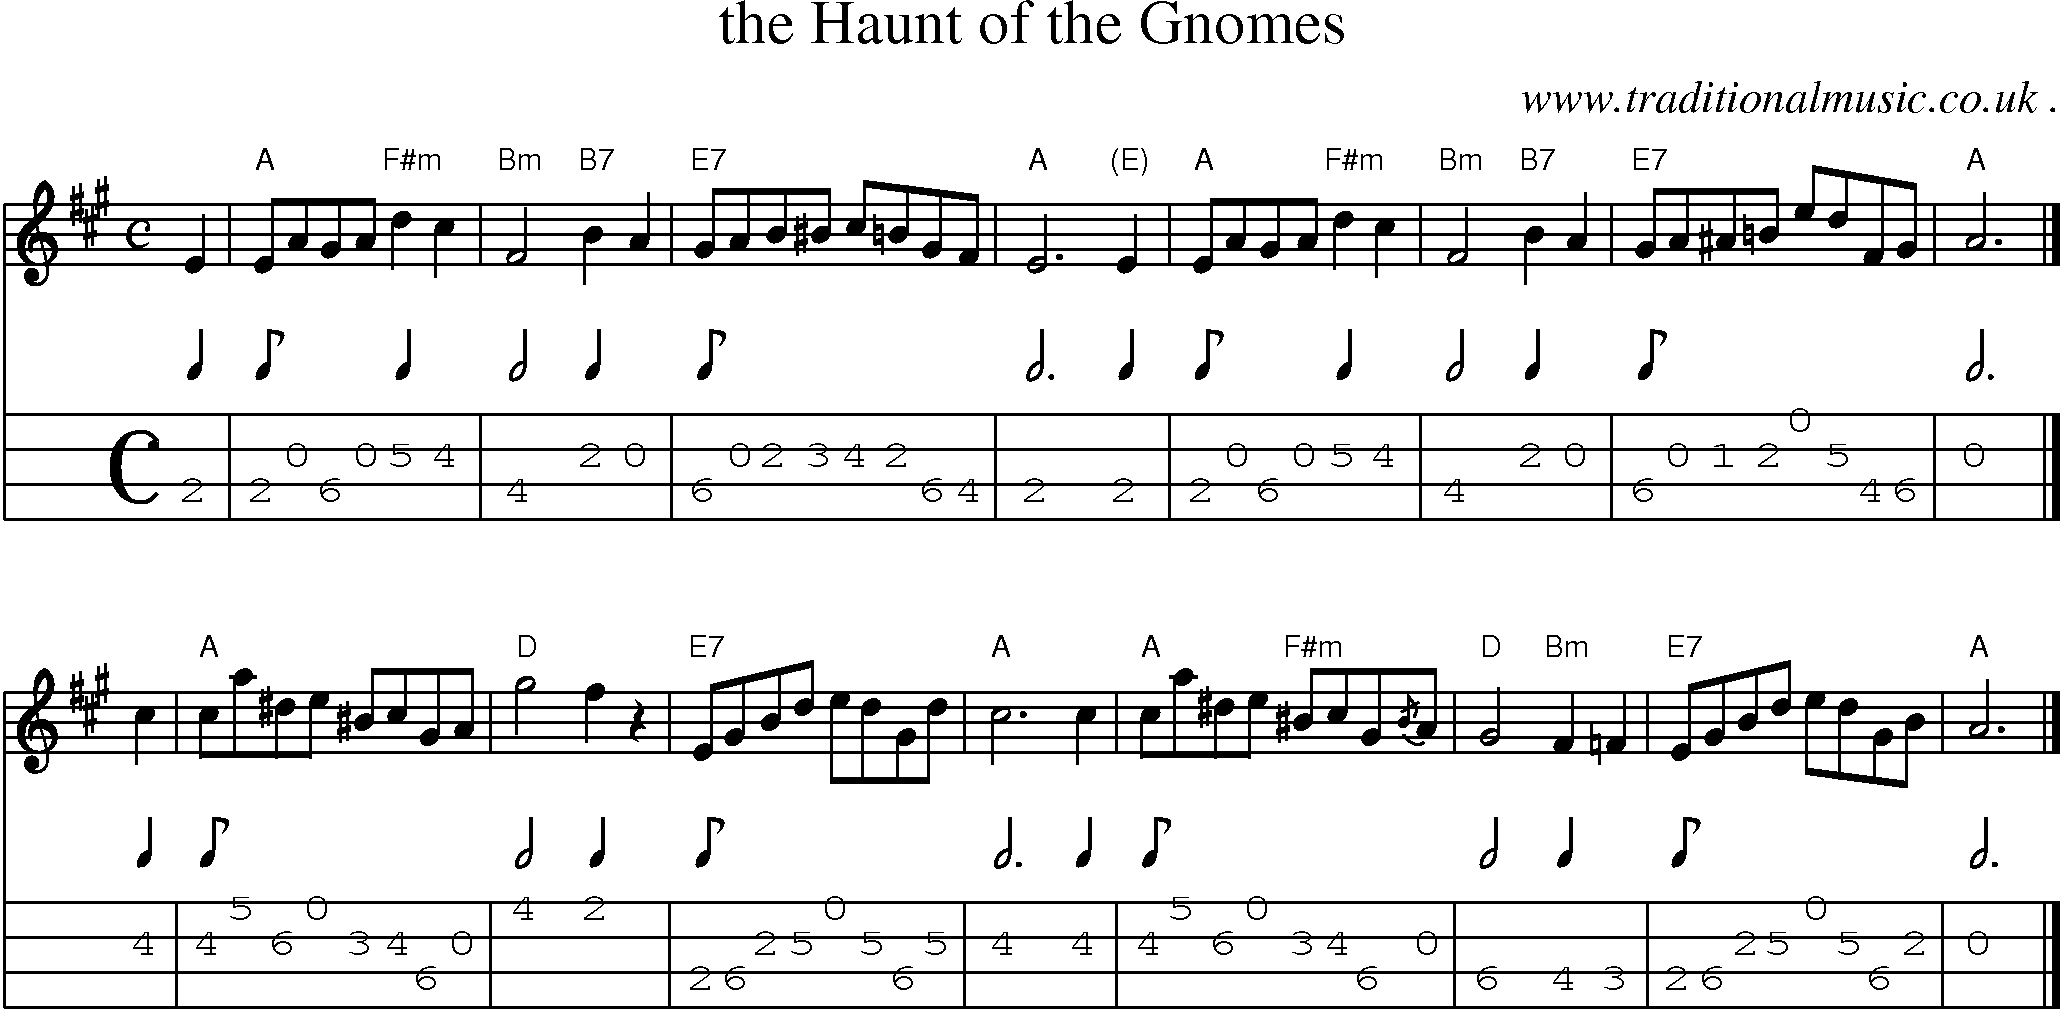 Sheet-music  score, Chords and Mandolin Tabs for The Haunt Of The Gnomes